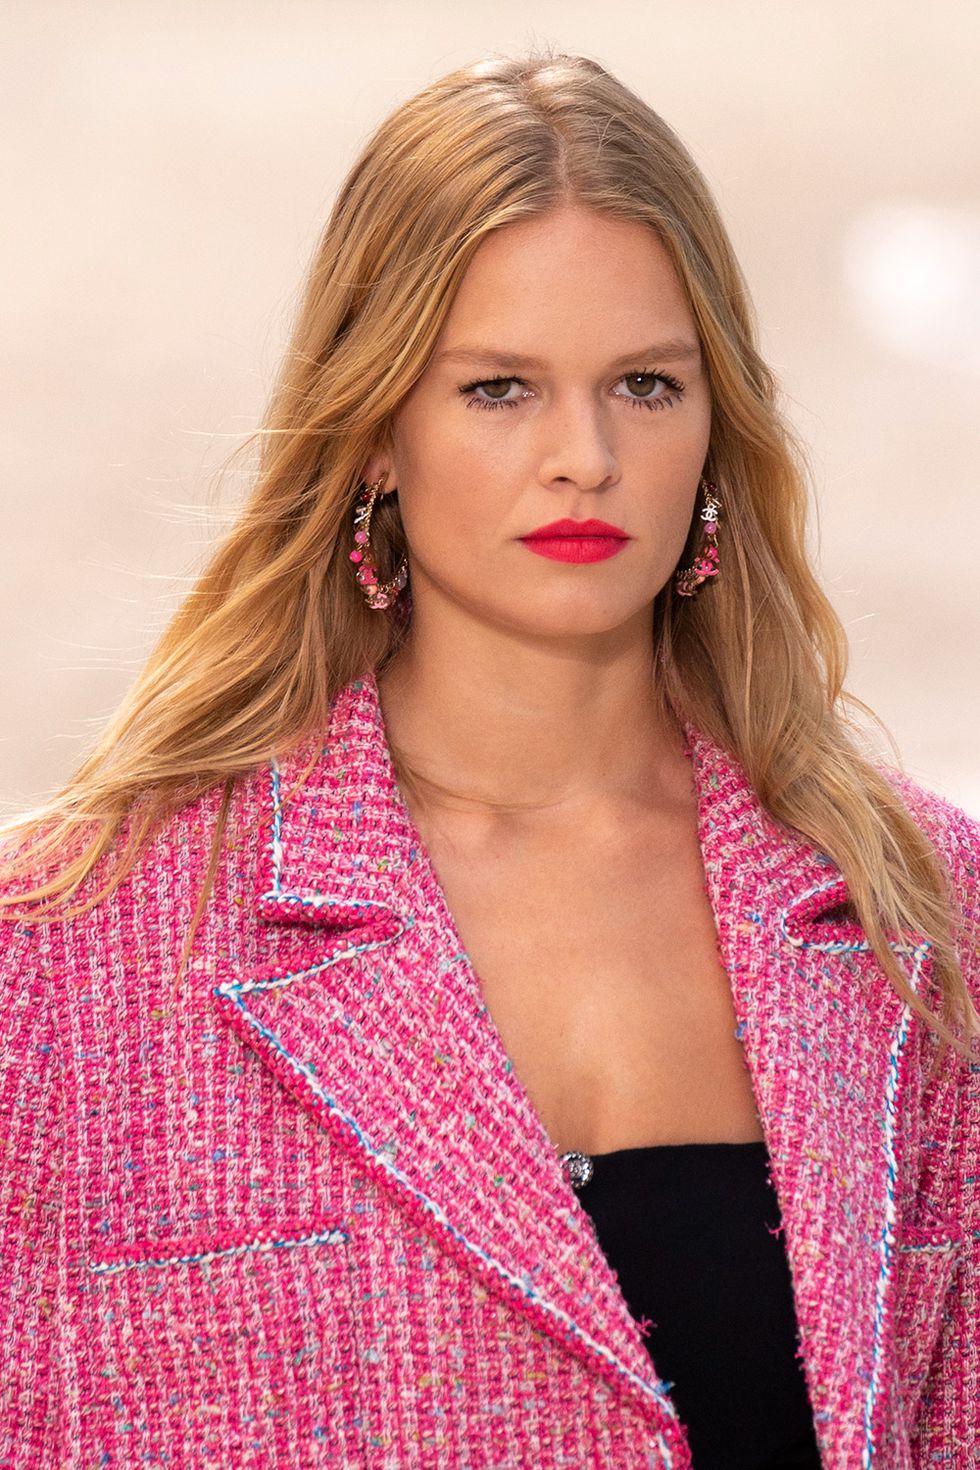 spring-summer-2019-hair-trends-natural-movement-chanel-imax-tree-1539006247